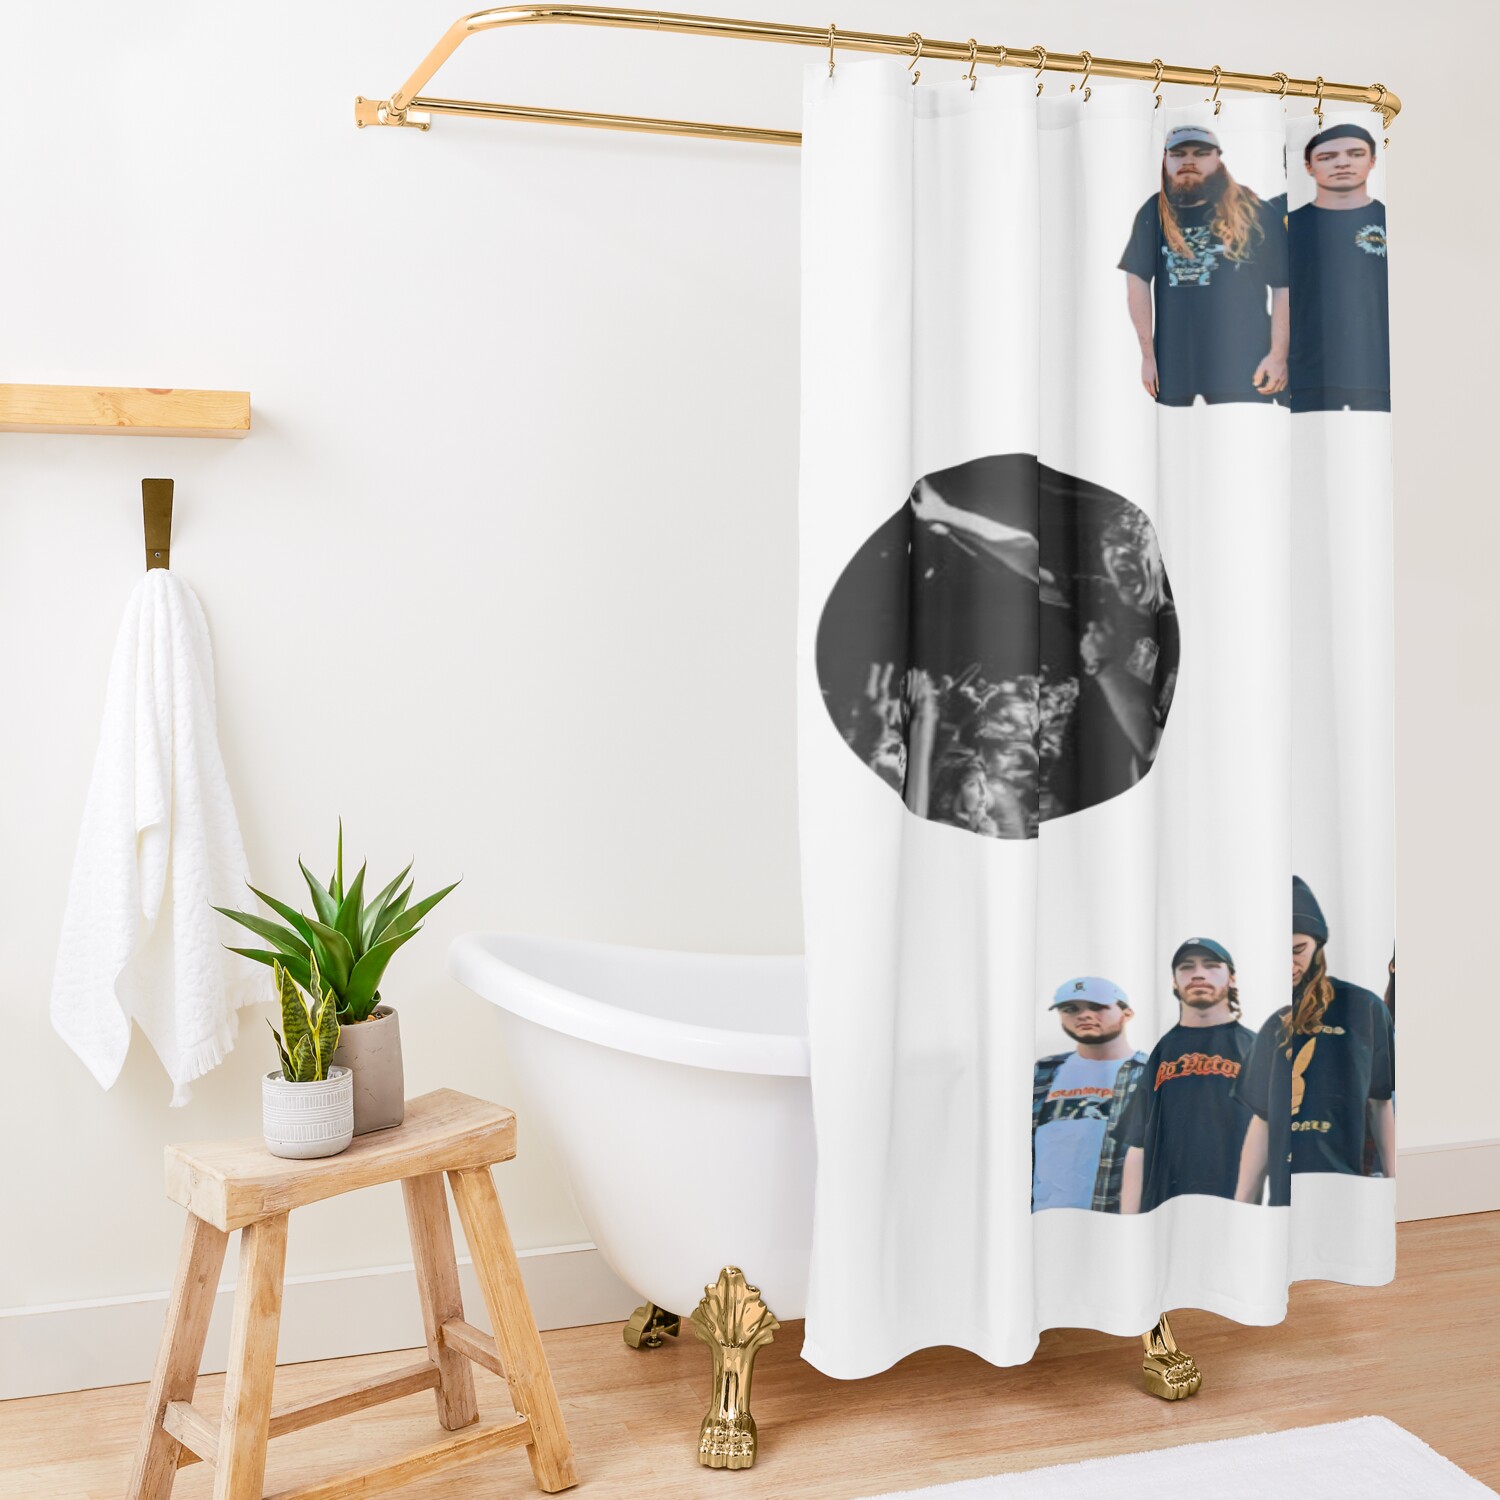 urshower curtain opensquare1500x1500 9 - Knocked Loose Shop